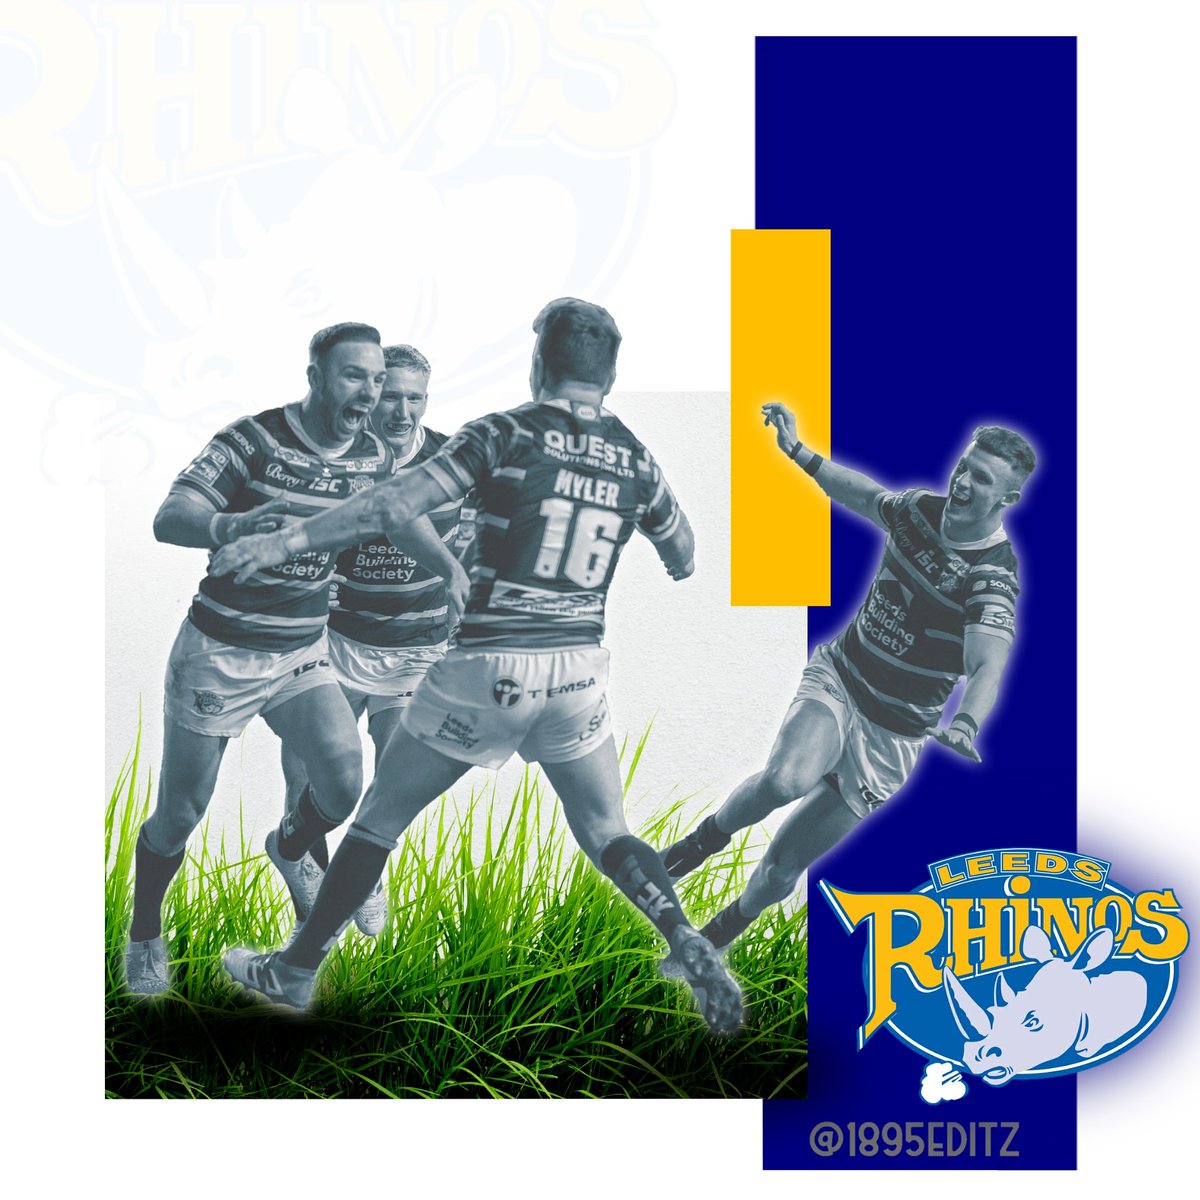 It's going to be a long few weeks with no Rugby League in the UK!😨

#leeds #leedsrhinos #rhinos #rhino #rugby #rugbyleague #sport #league #headingleystadium #headingley #mot #alaw #marchingontogether #yorkshire #superleague #edit #art #rugbygram